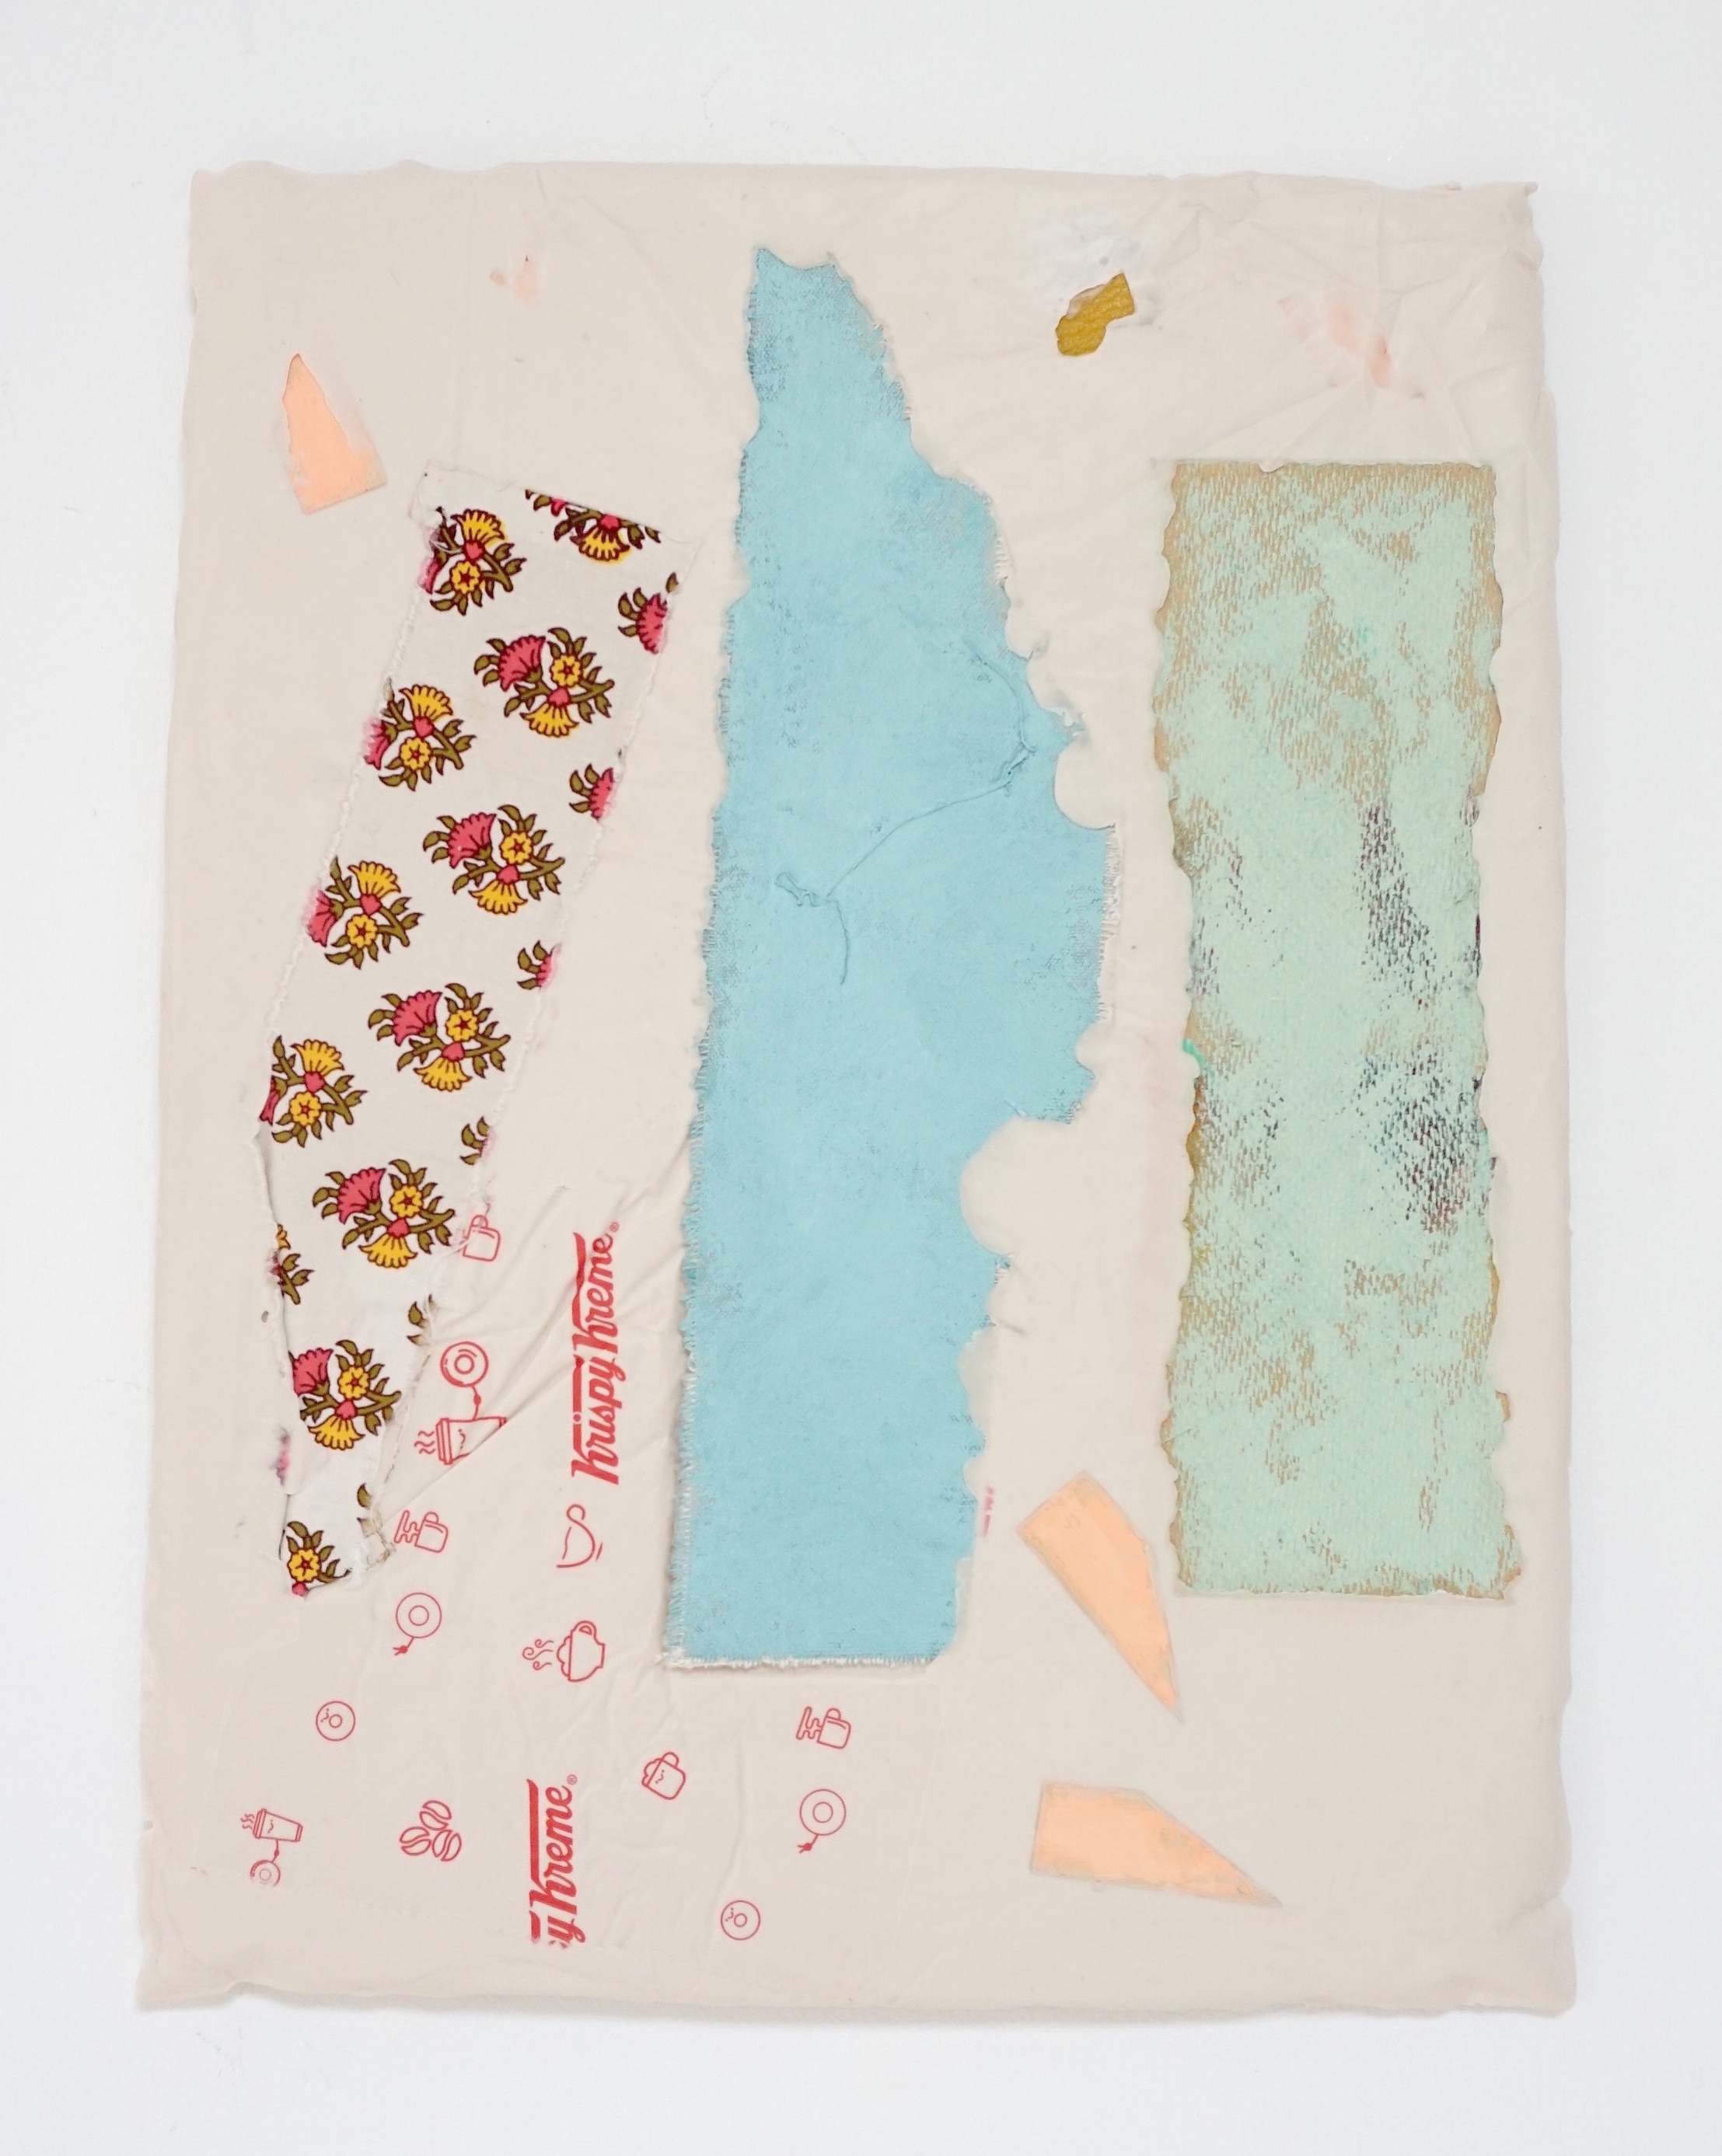 Untitled Fragment (found fabric, Krispy Kreme wrapper, pink wedges, canvas, wood) | Composite and Mixed Media | 42 x 32 cm